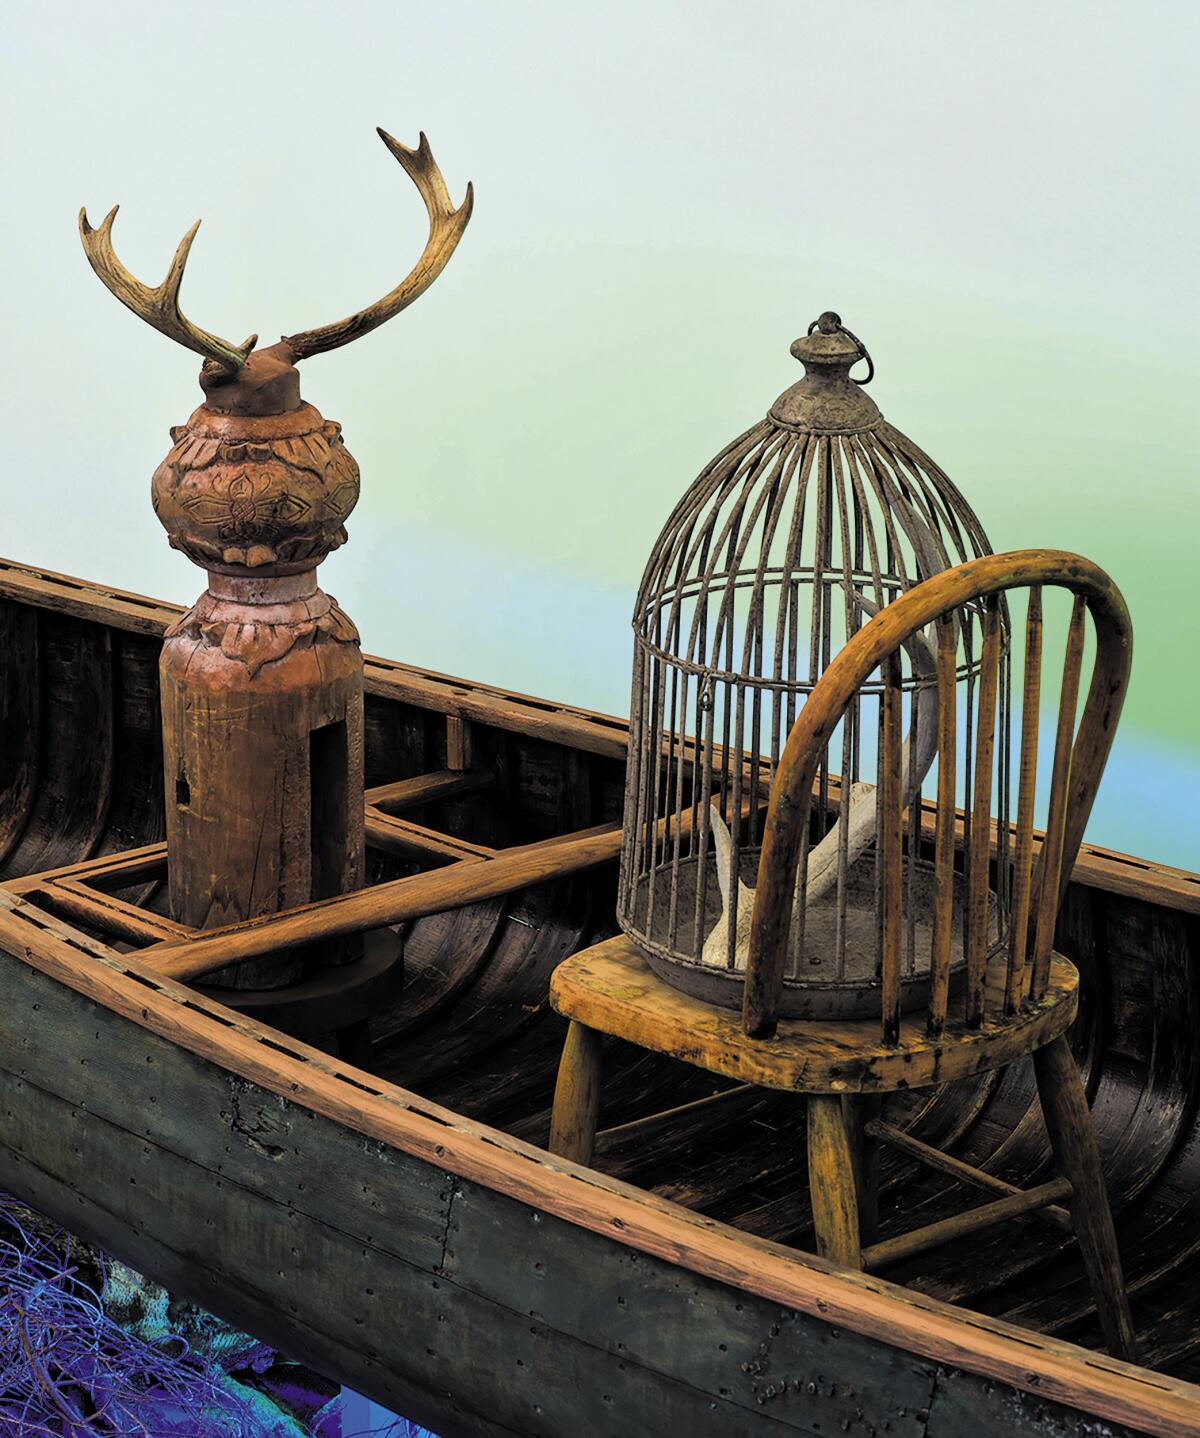 A chair, birdcage and antlers sitting in a canoe.